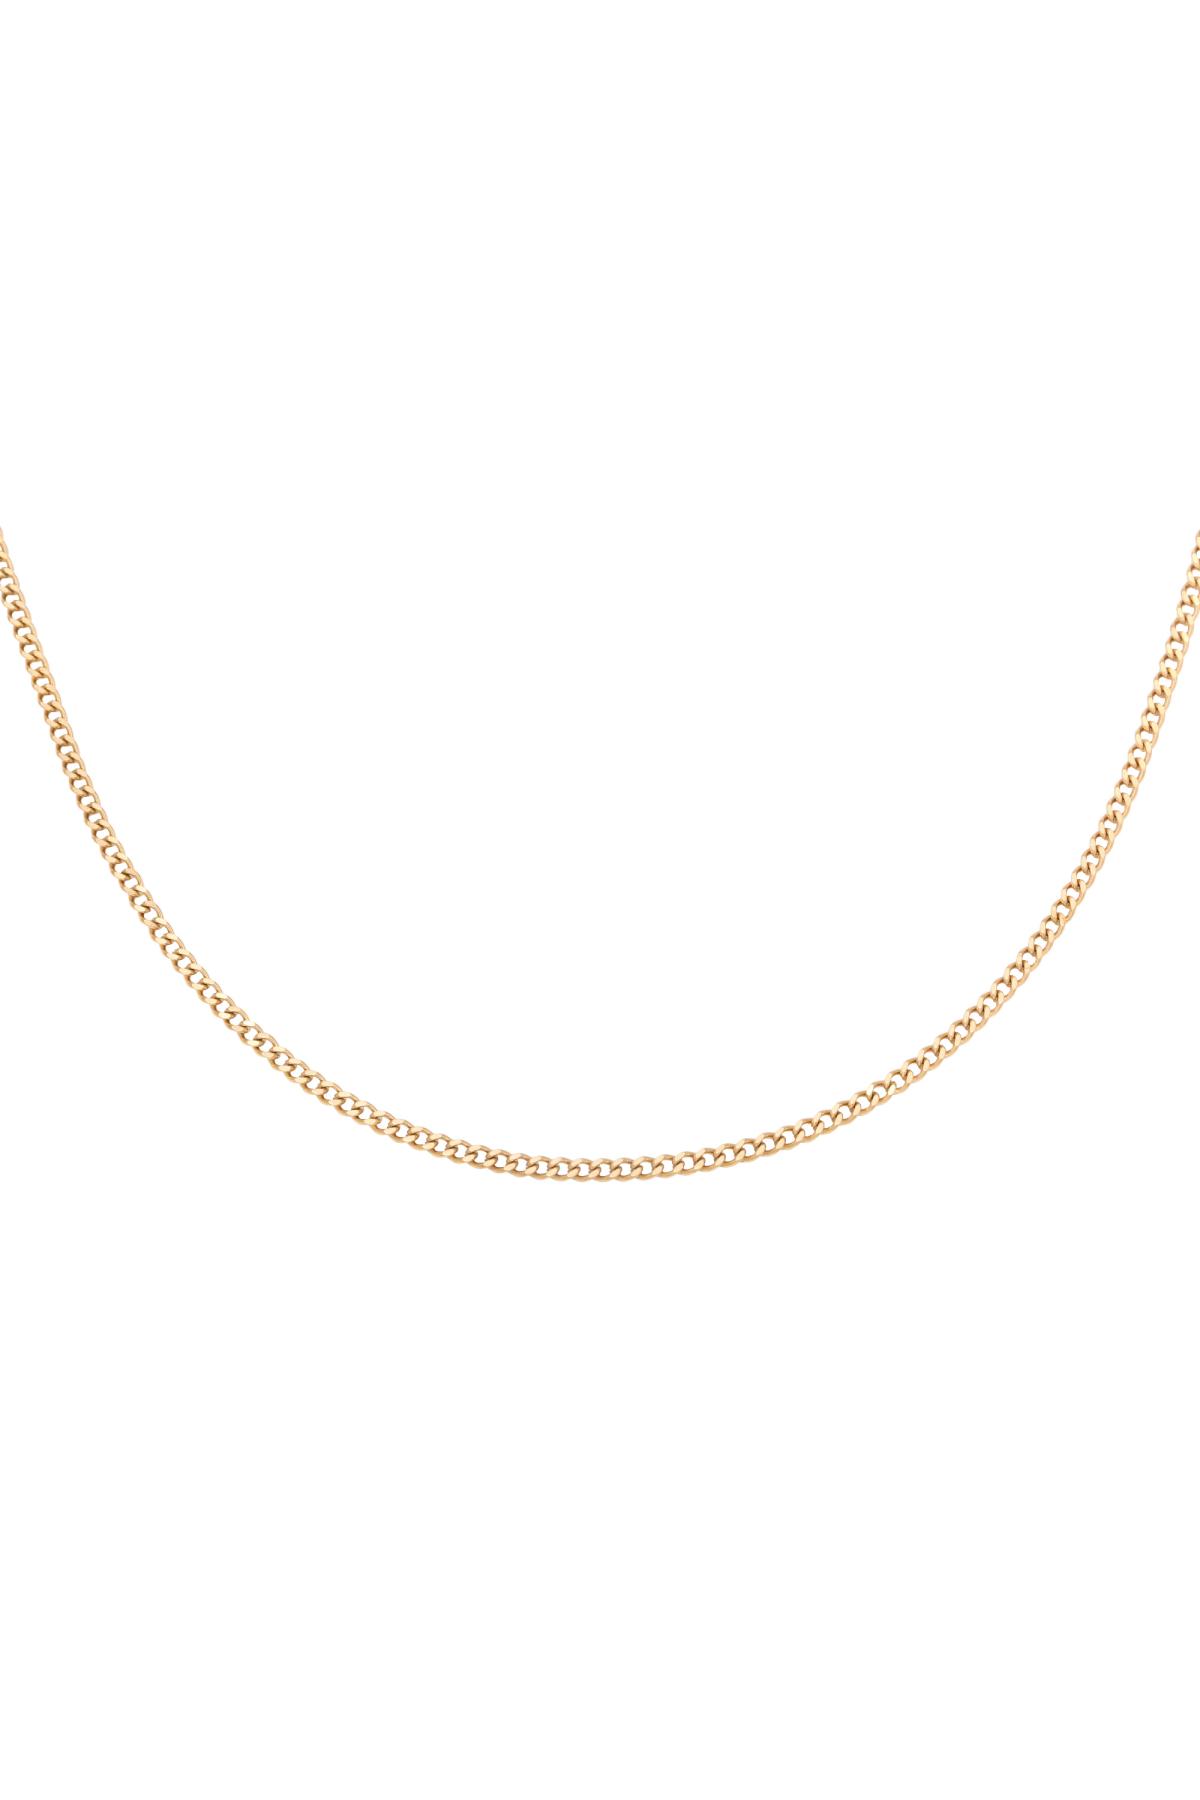 Gold / Necklace Tiny Plain Chains Gold Stainless Steel 